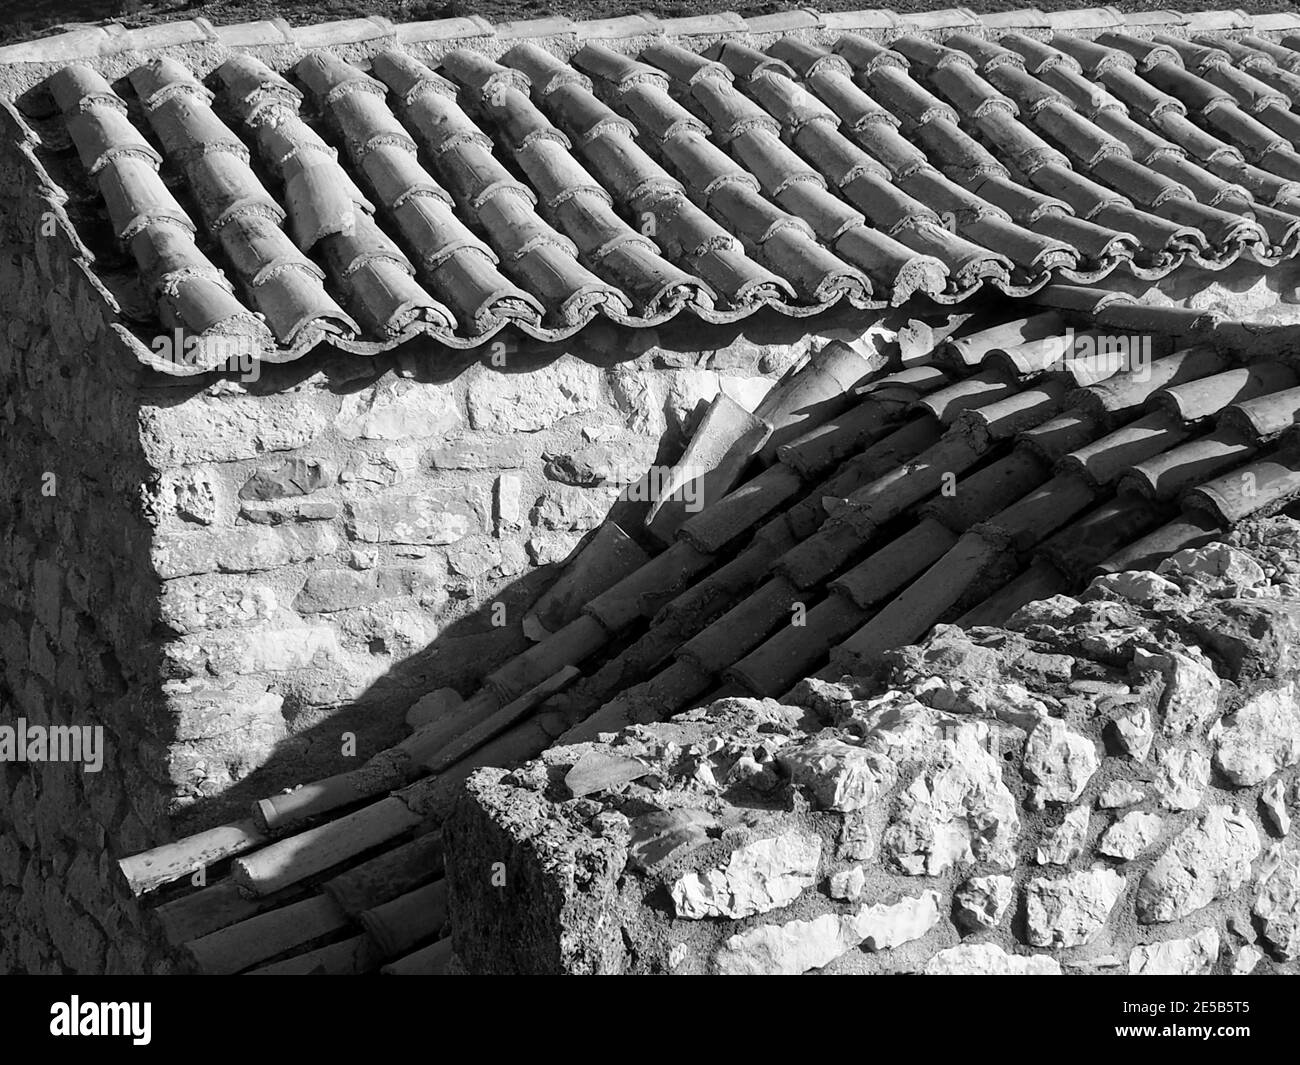 Abstract aspect of tiled roofs of old traditional houses, Greece Stock Photo